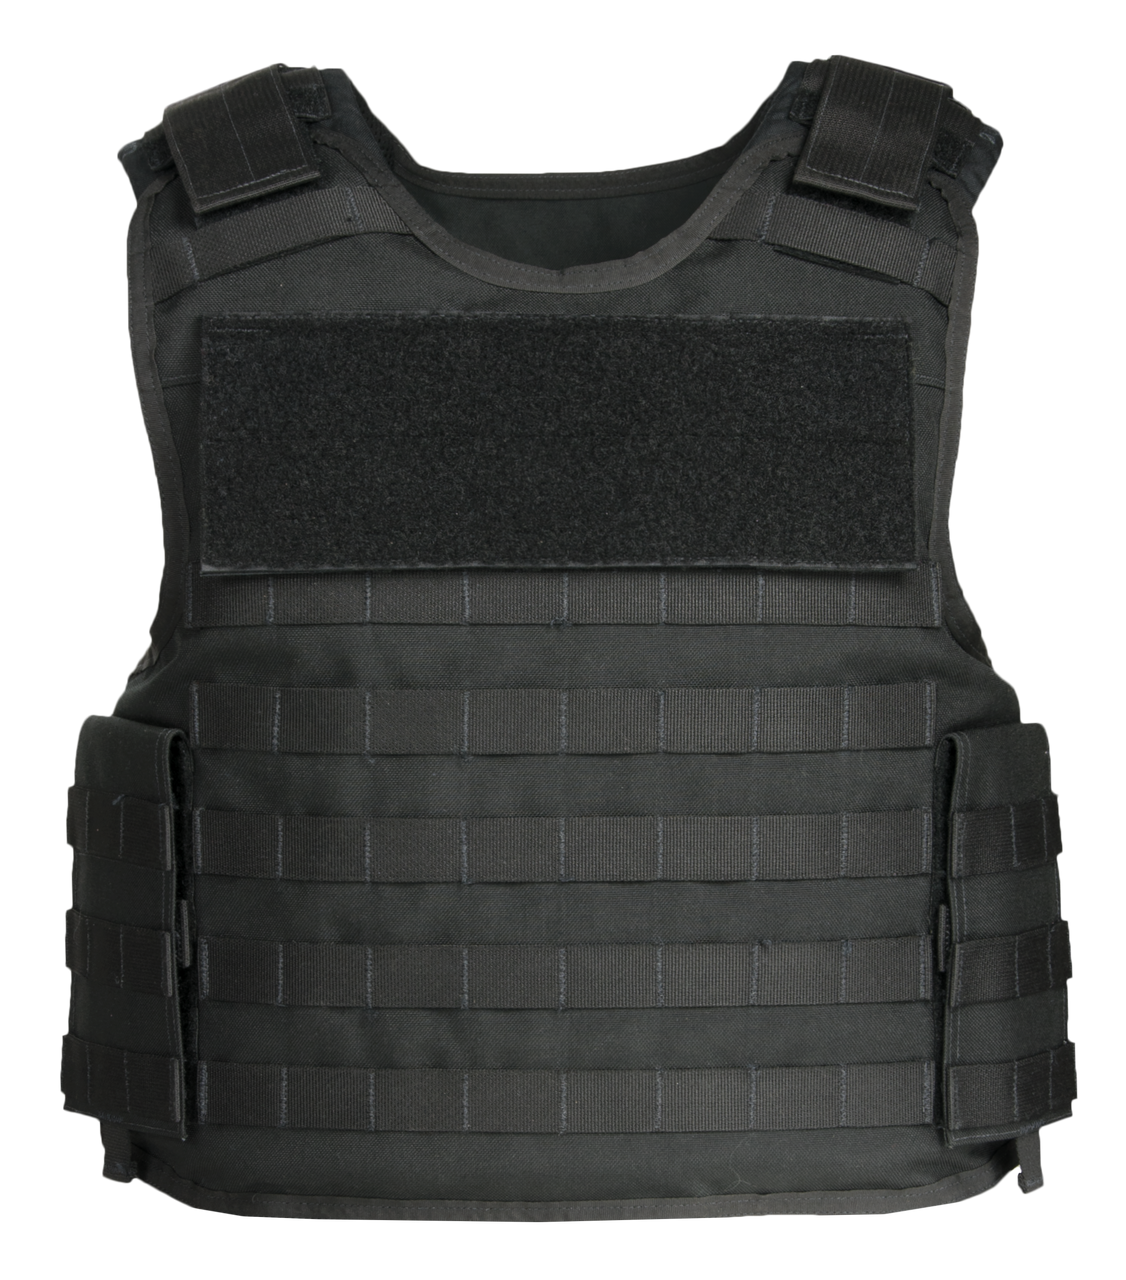 Armor Express OCX Men's Overt Ballistic Body Armor Carrier, Front hard armor plate pockets, adjustable shoulder straps and a drag handle on rear of vest, Choose Carrier only or Carrier and Panels (Soft Armor), NIJ Certified - Level 2, or Level 3A T